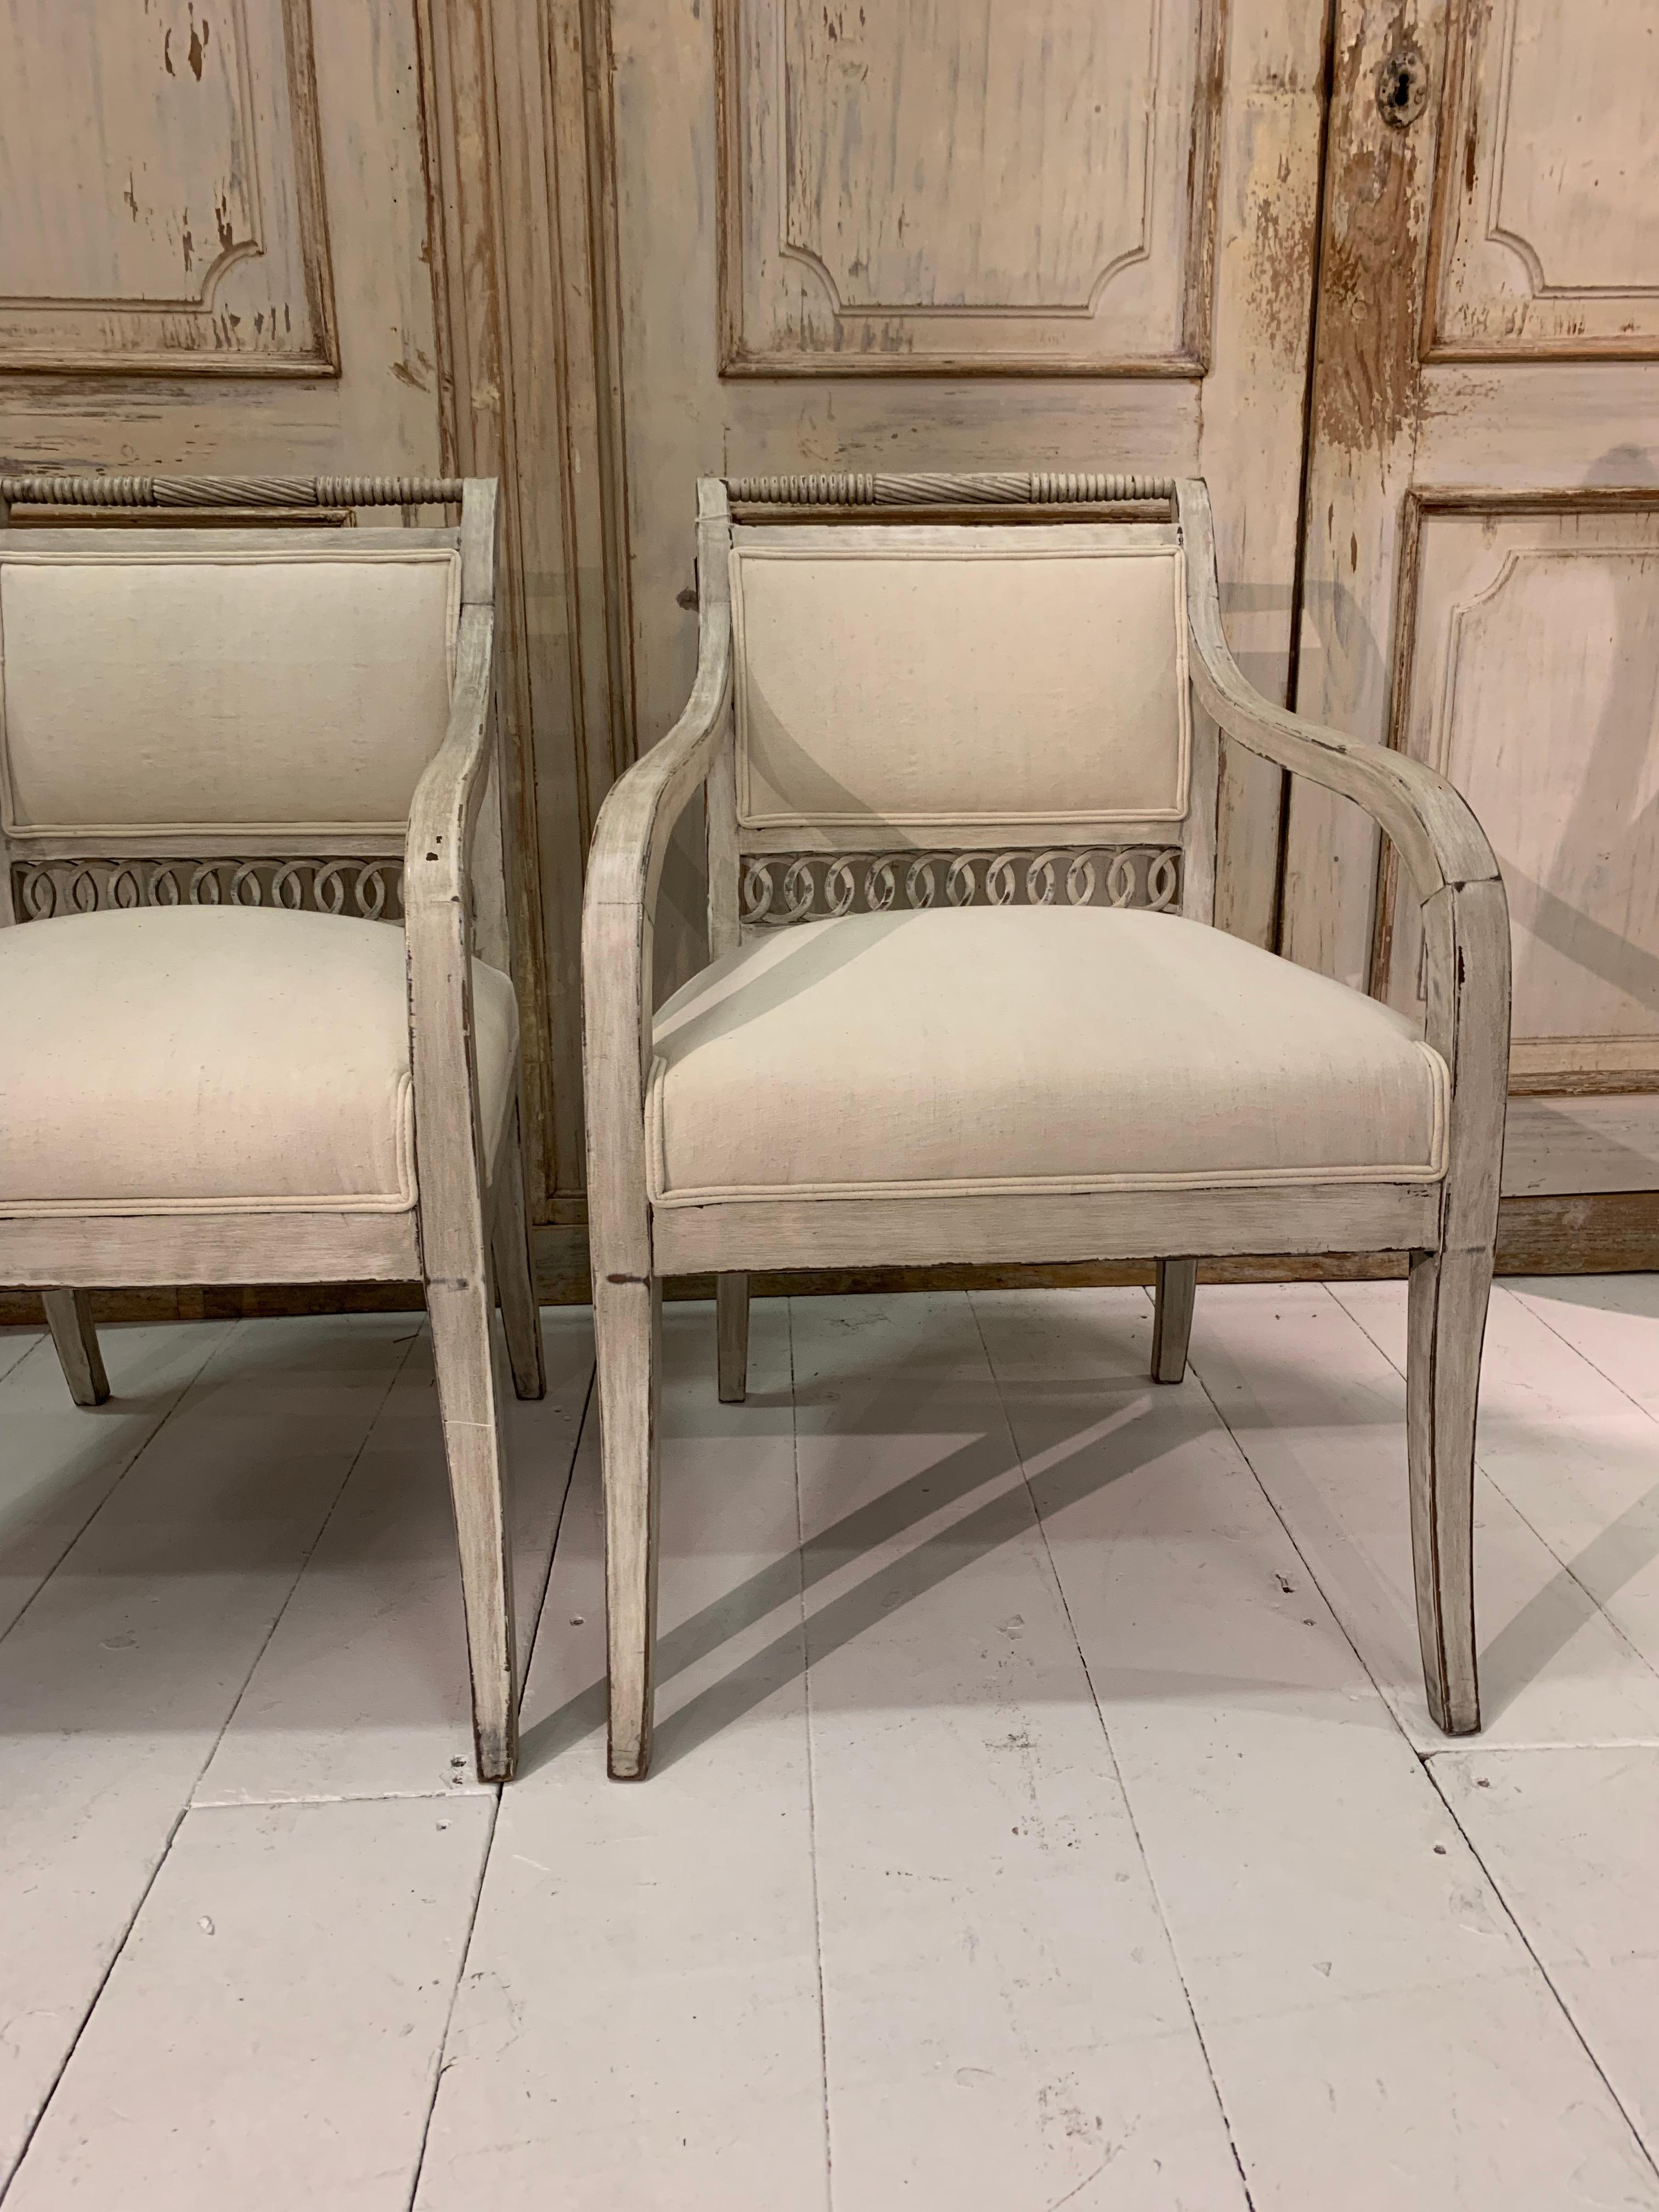 A pair of charming late 19th century upholstered painted Swedish open armchairs with a decorative fretwork border detail and turned stretchers to their backs.
Recently reupholstered in a light vintage French linen.

Perfect for a bedroom or as